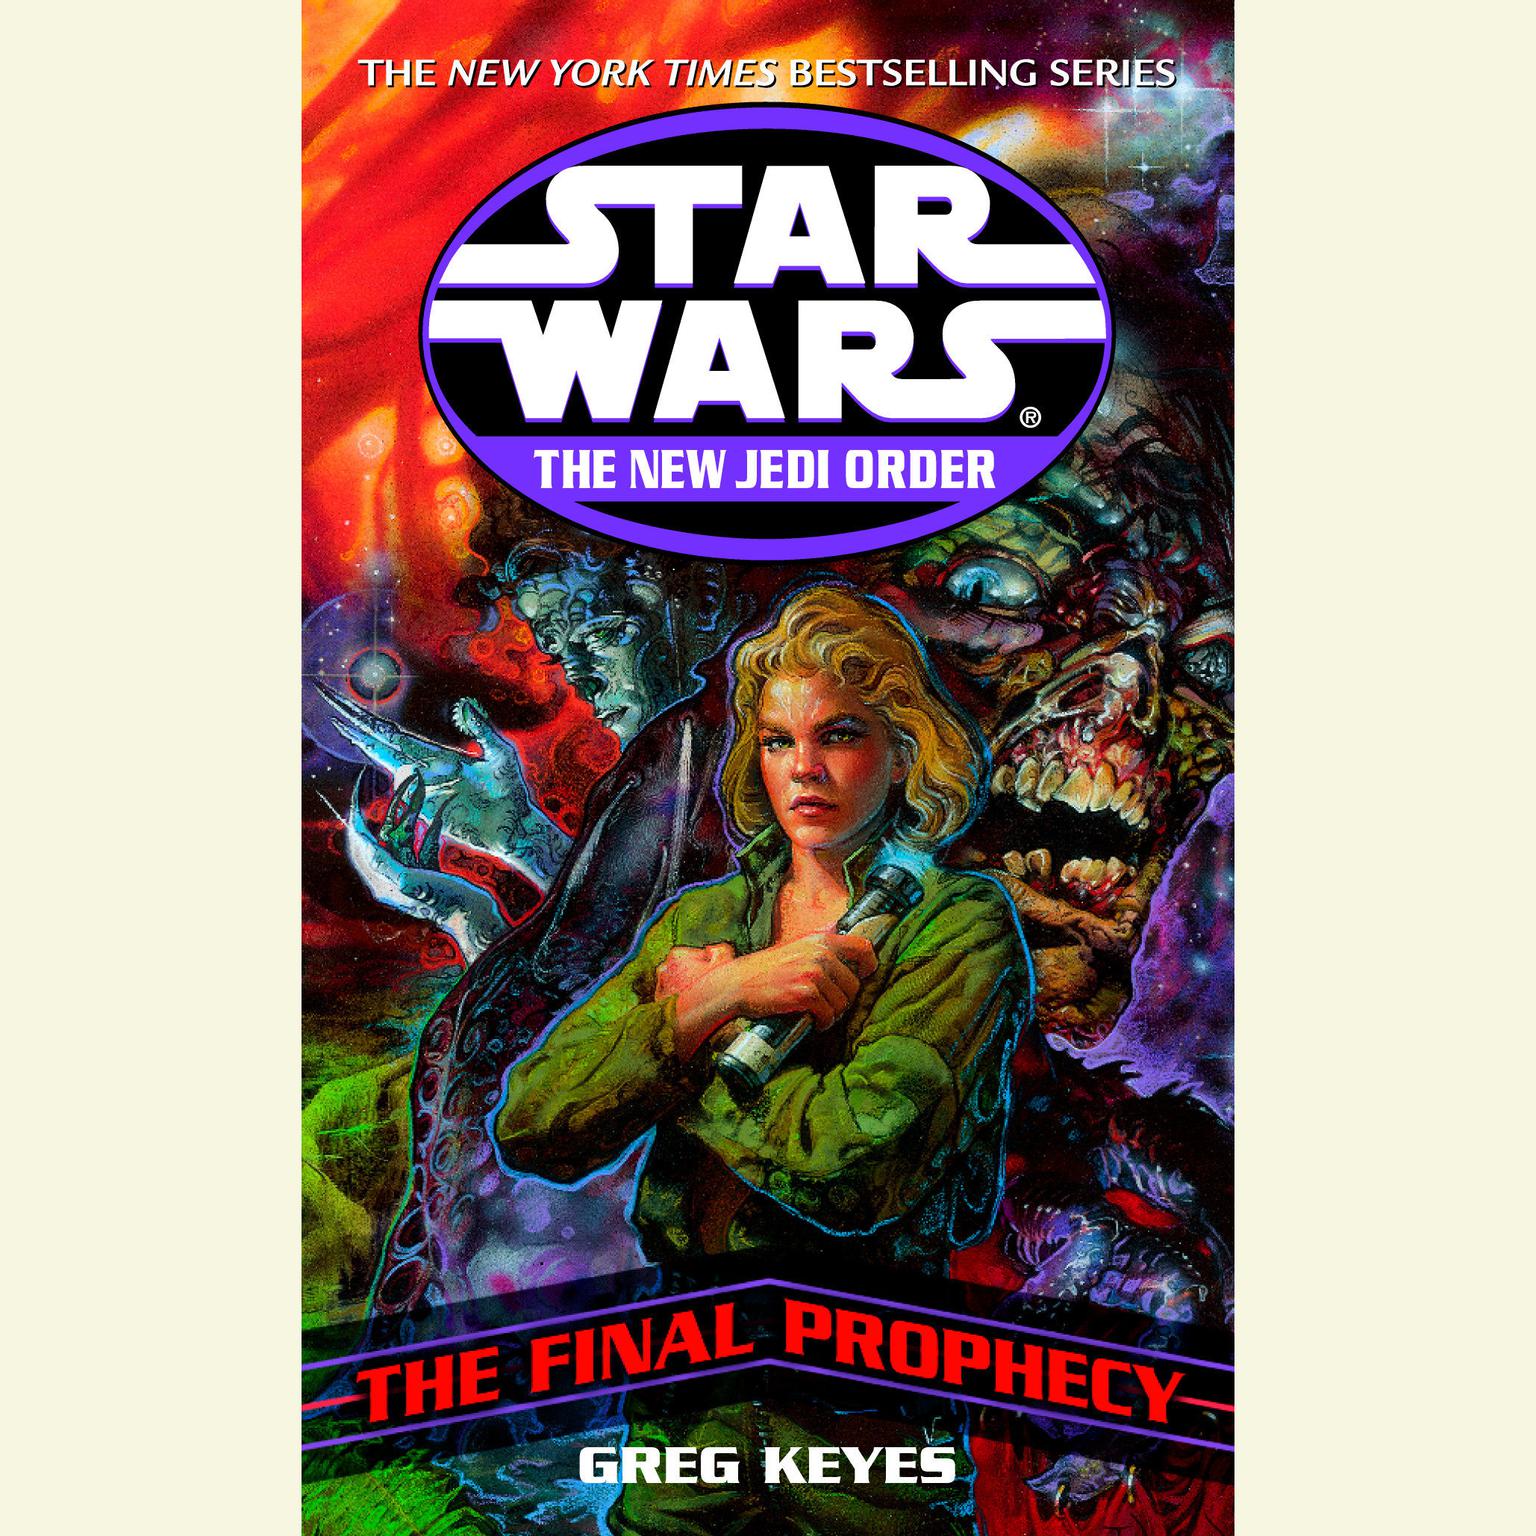 Star Wars: The New Jedi Order: Edge of Victory III: The Final Prophecy (Abridged) Audiobook, by Greg Keyes